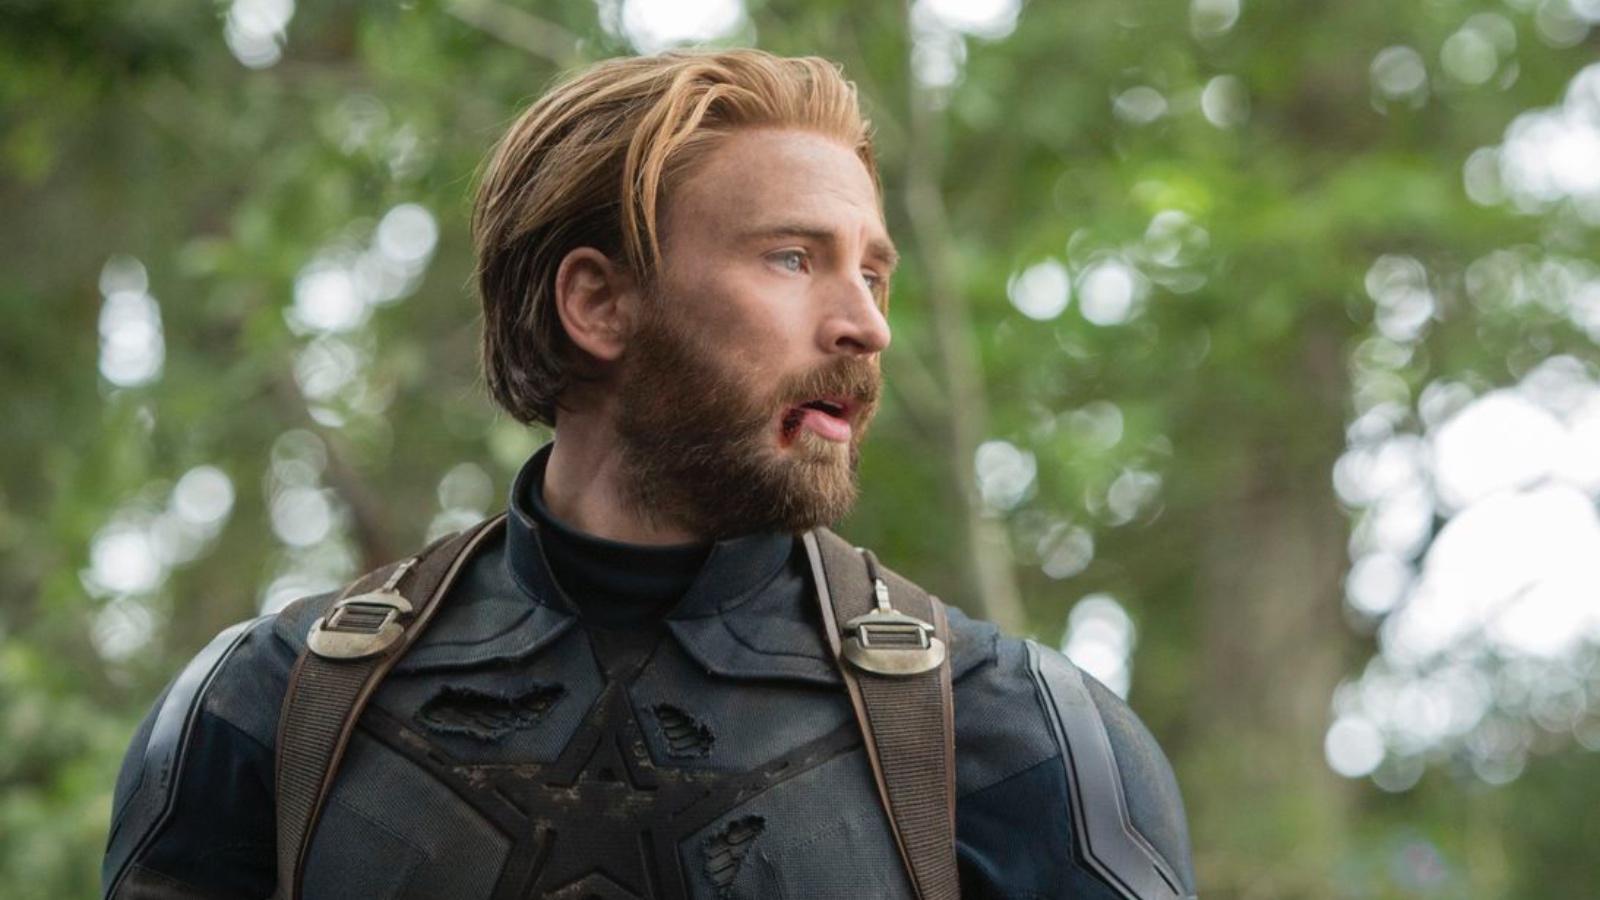 Captain America in Avengers: Infinity War played by Chris Evans